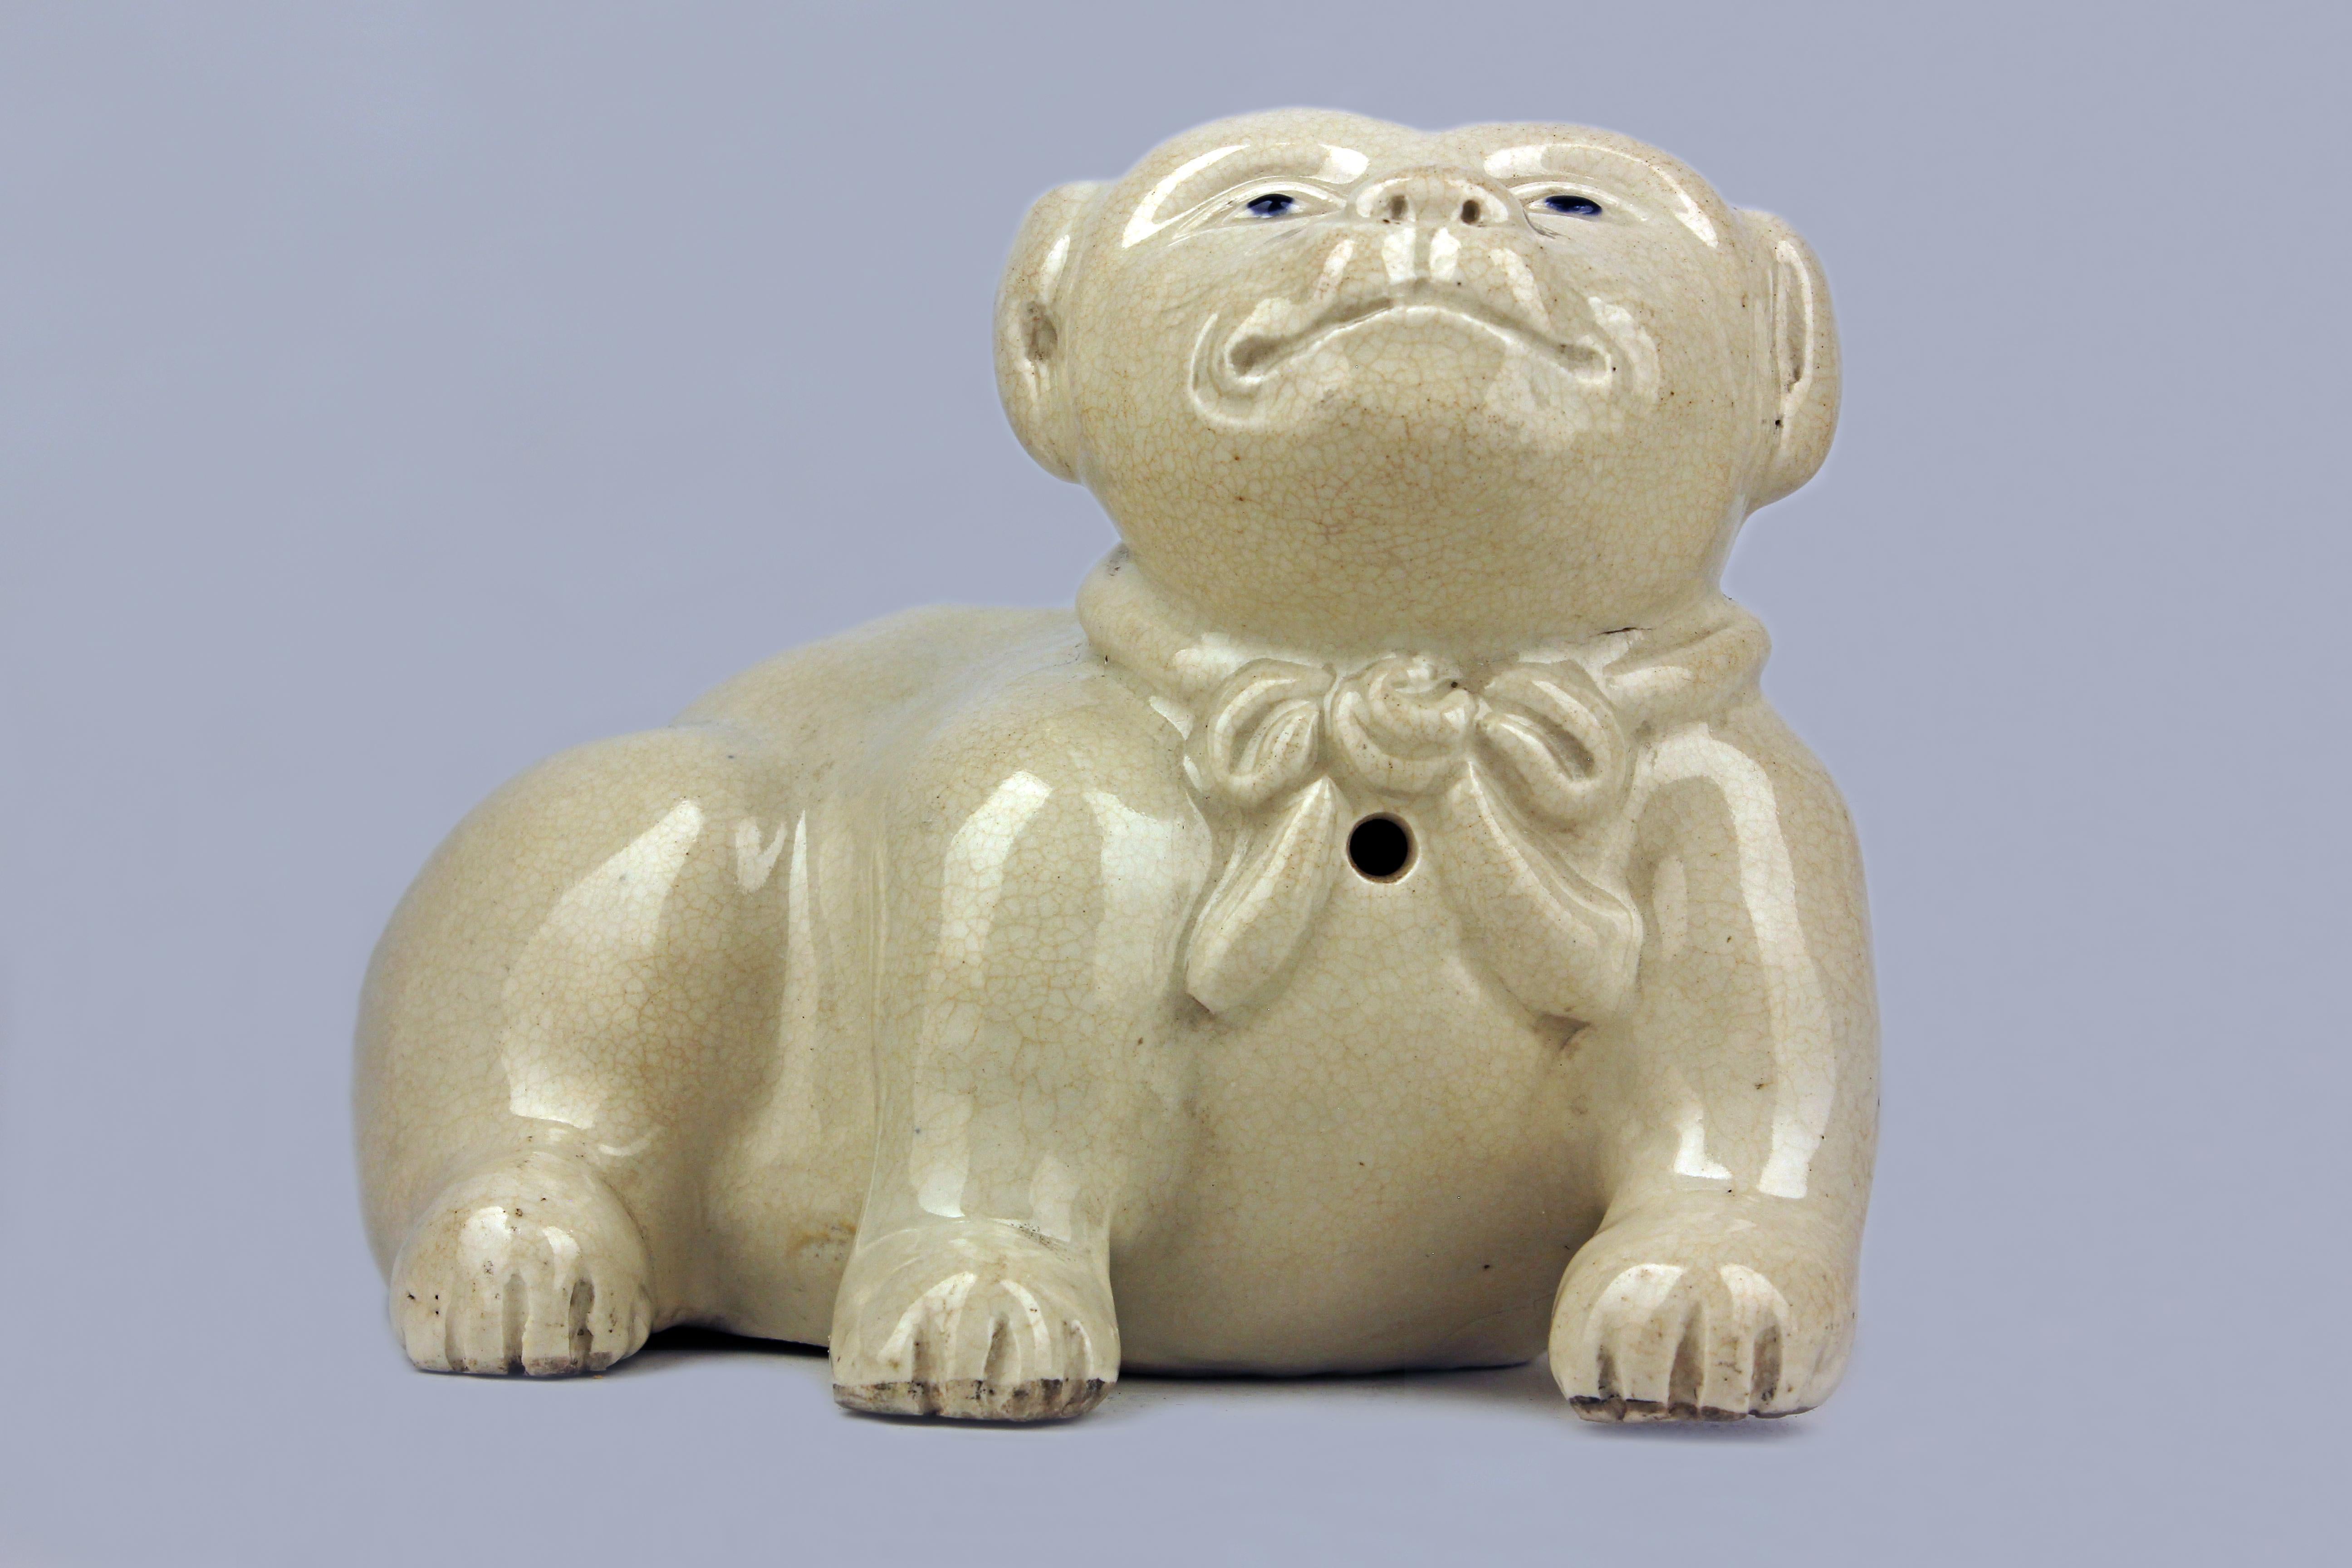 Late 18th Century/Edo-Meiji Period Japanese Glazed Porcelain Sculpture of a Dog For Sale 4